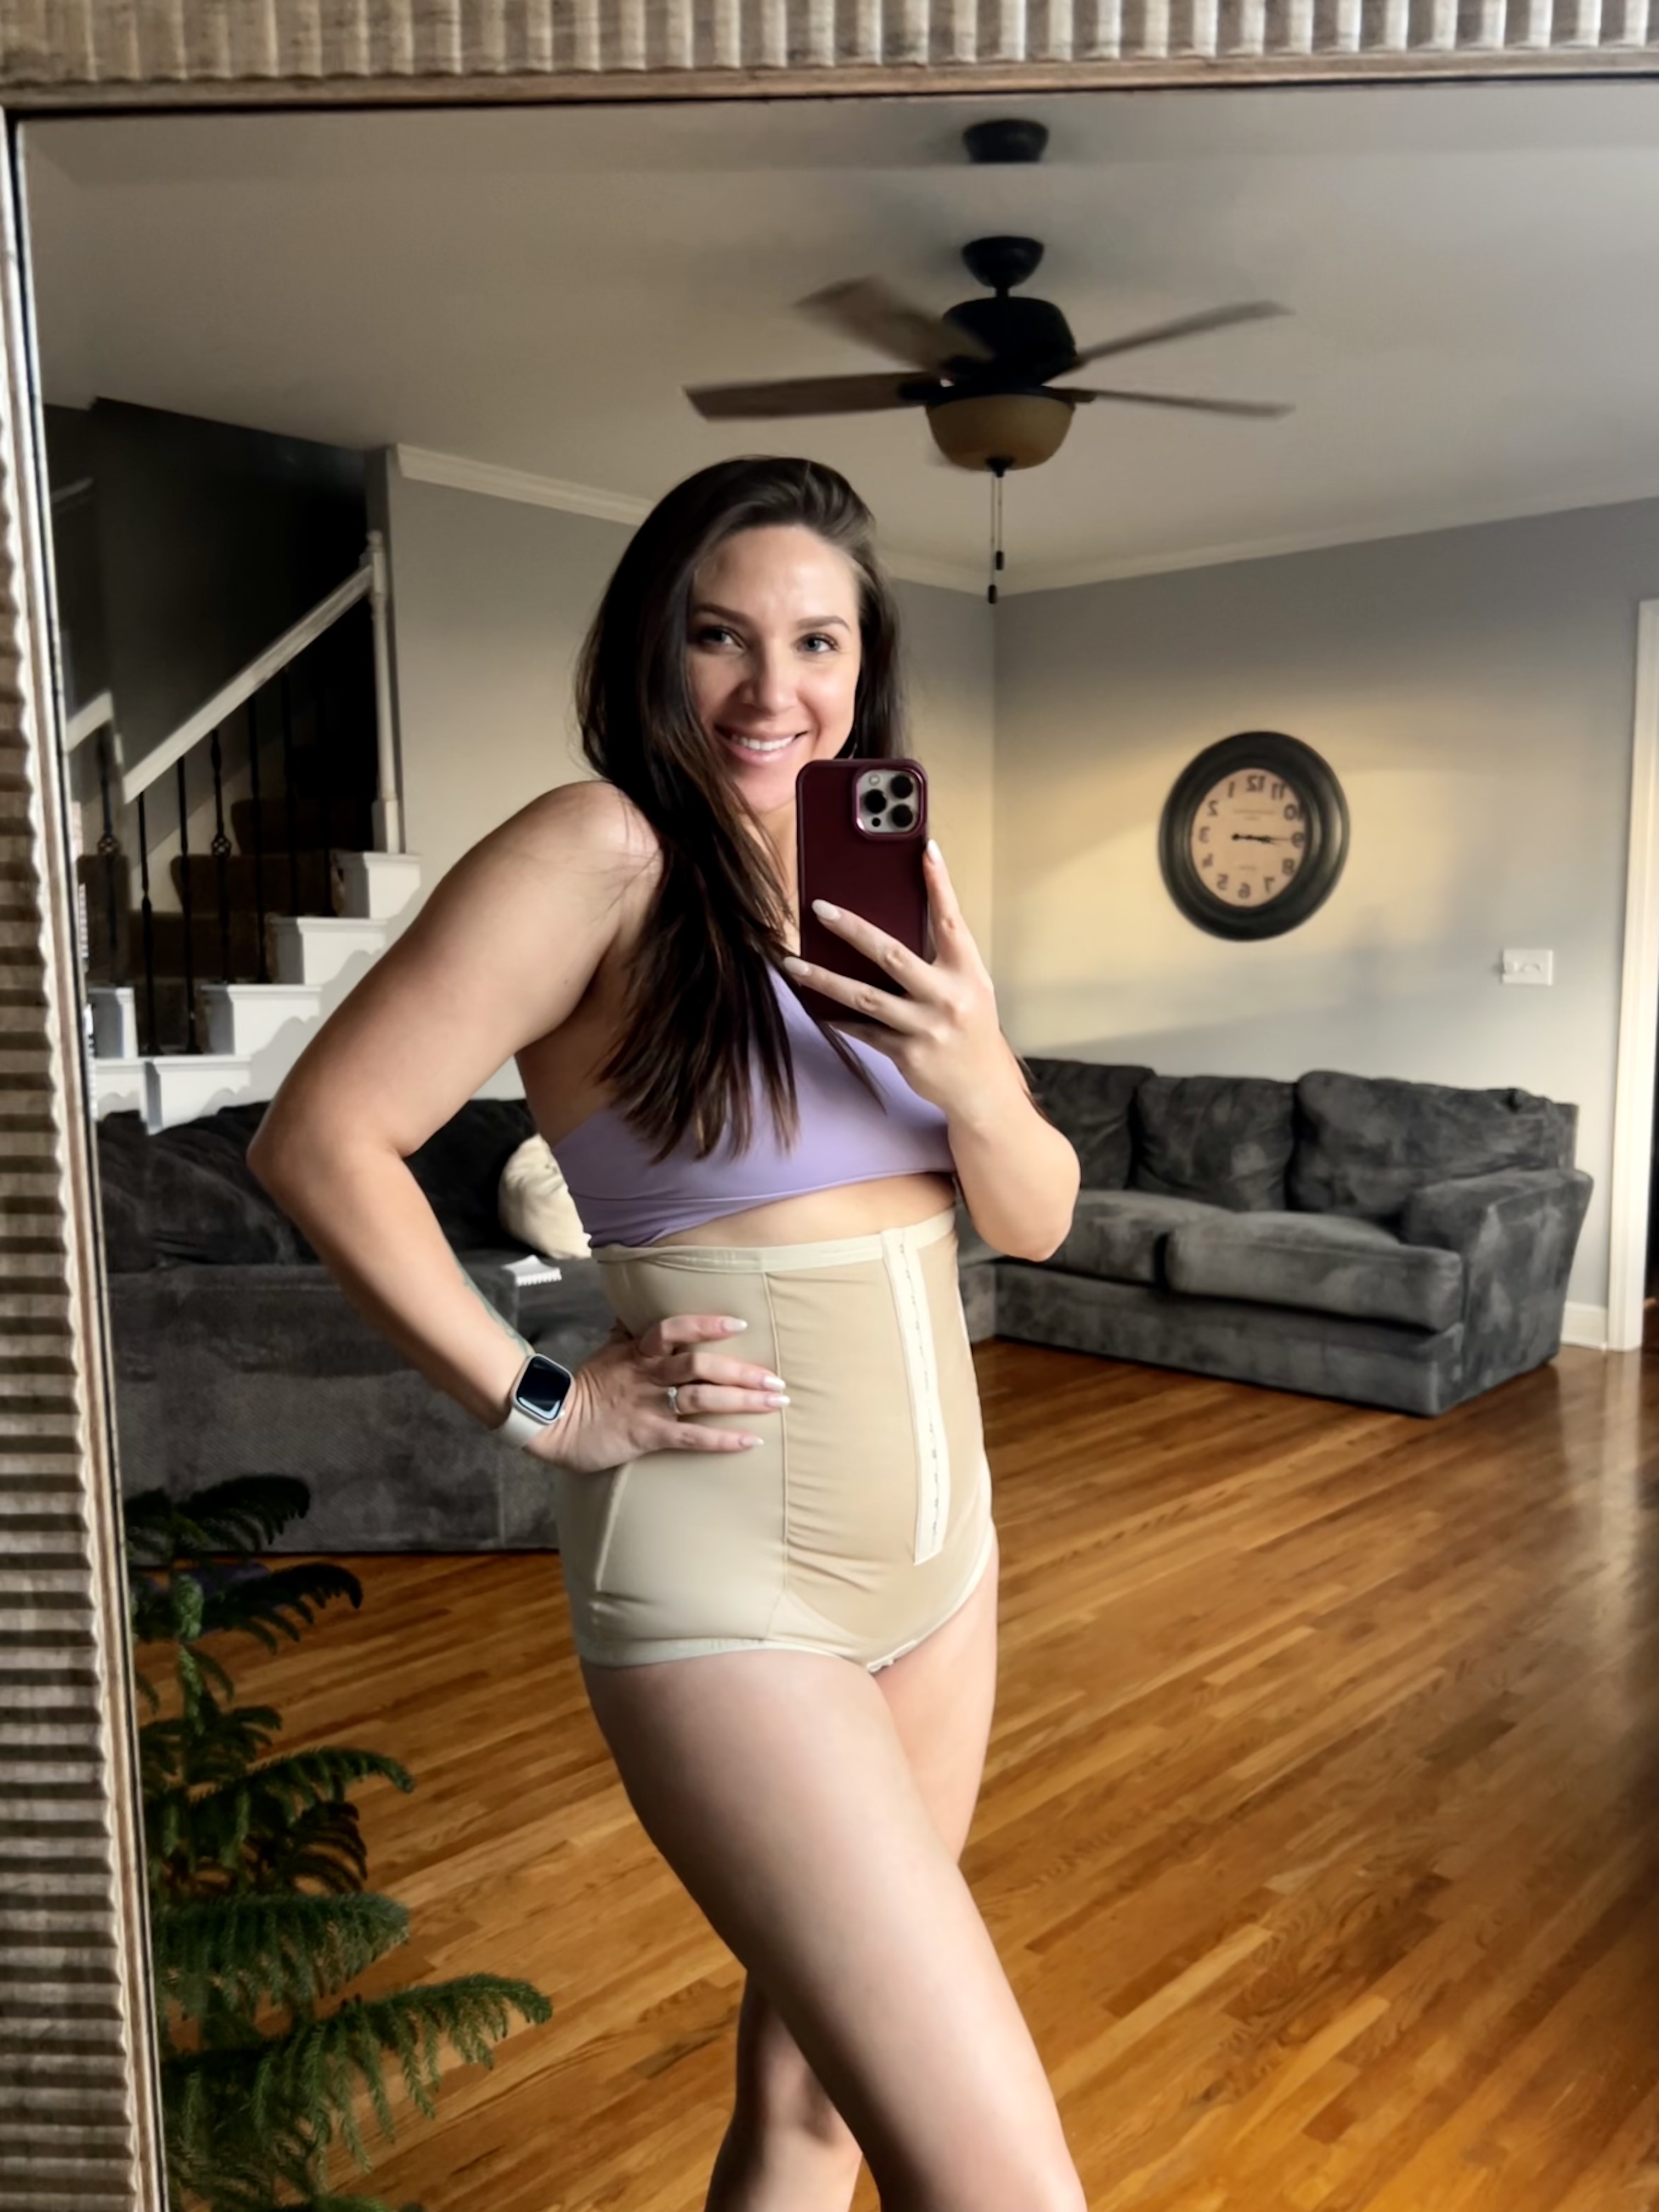 Wearing a Bellefit Postpartum Girdle provides compression and